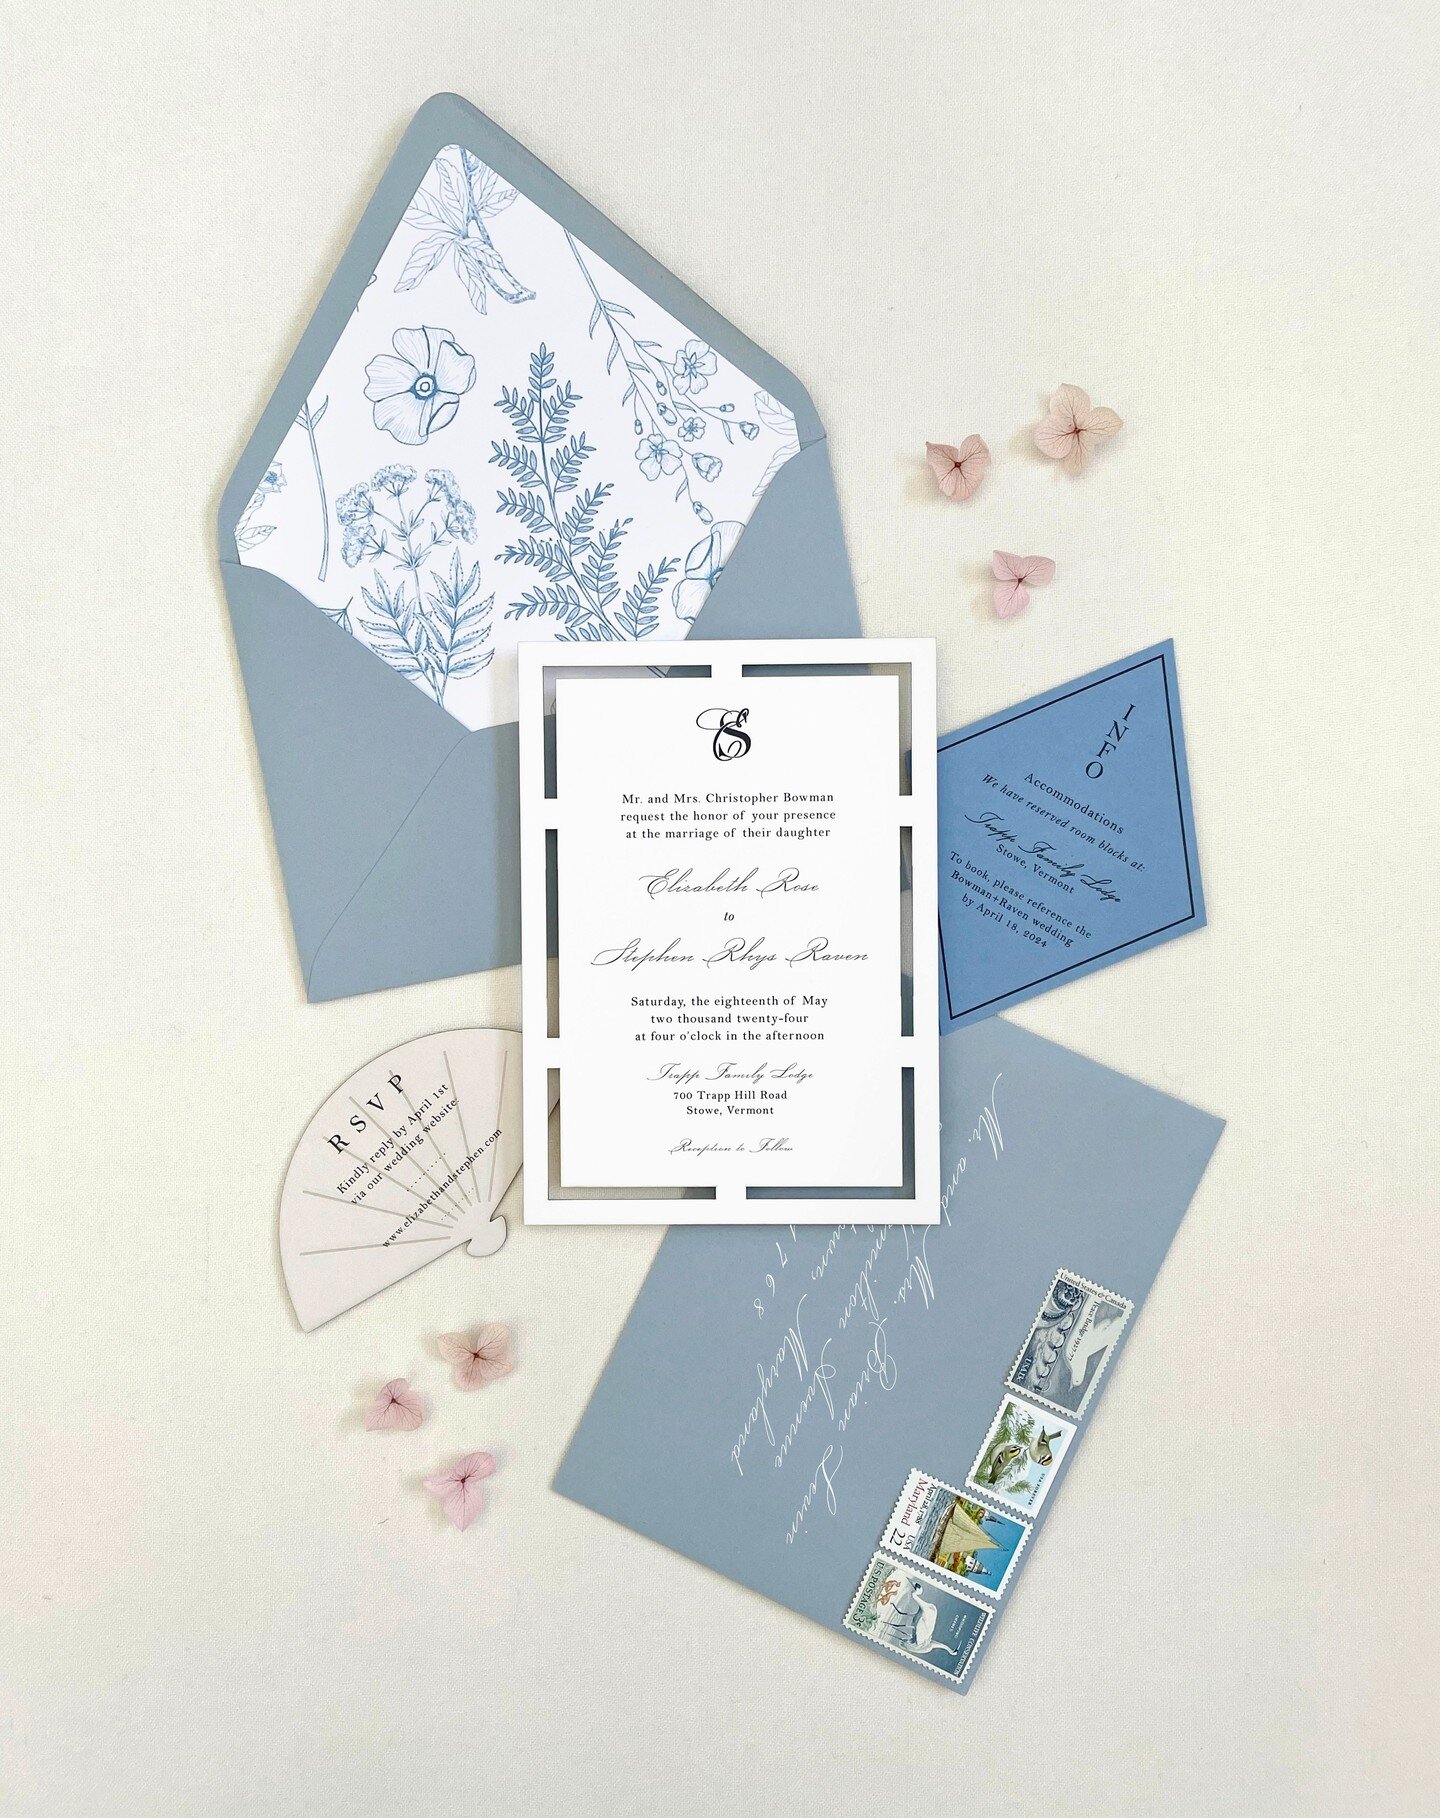 A gorgeous wedding suite with fun shapes 🤍

#christinadesignstudio #christinaruddcalligraphy #cdsinvitations #design #graphicdesign #graphicdesigner #art #artist #invitations #weddinginvitations #weddinginvites #weddinginvite #stationery #floral #we